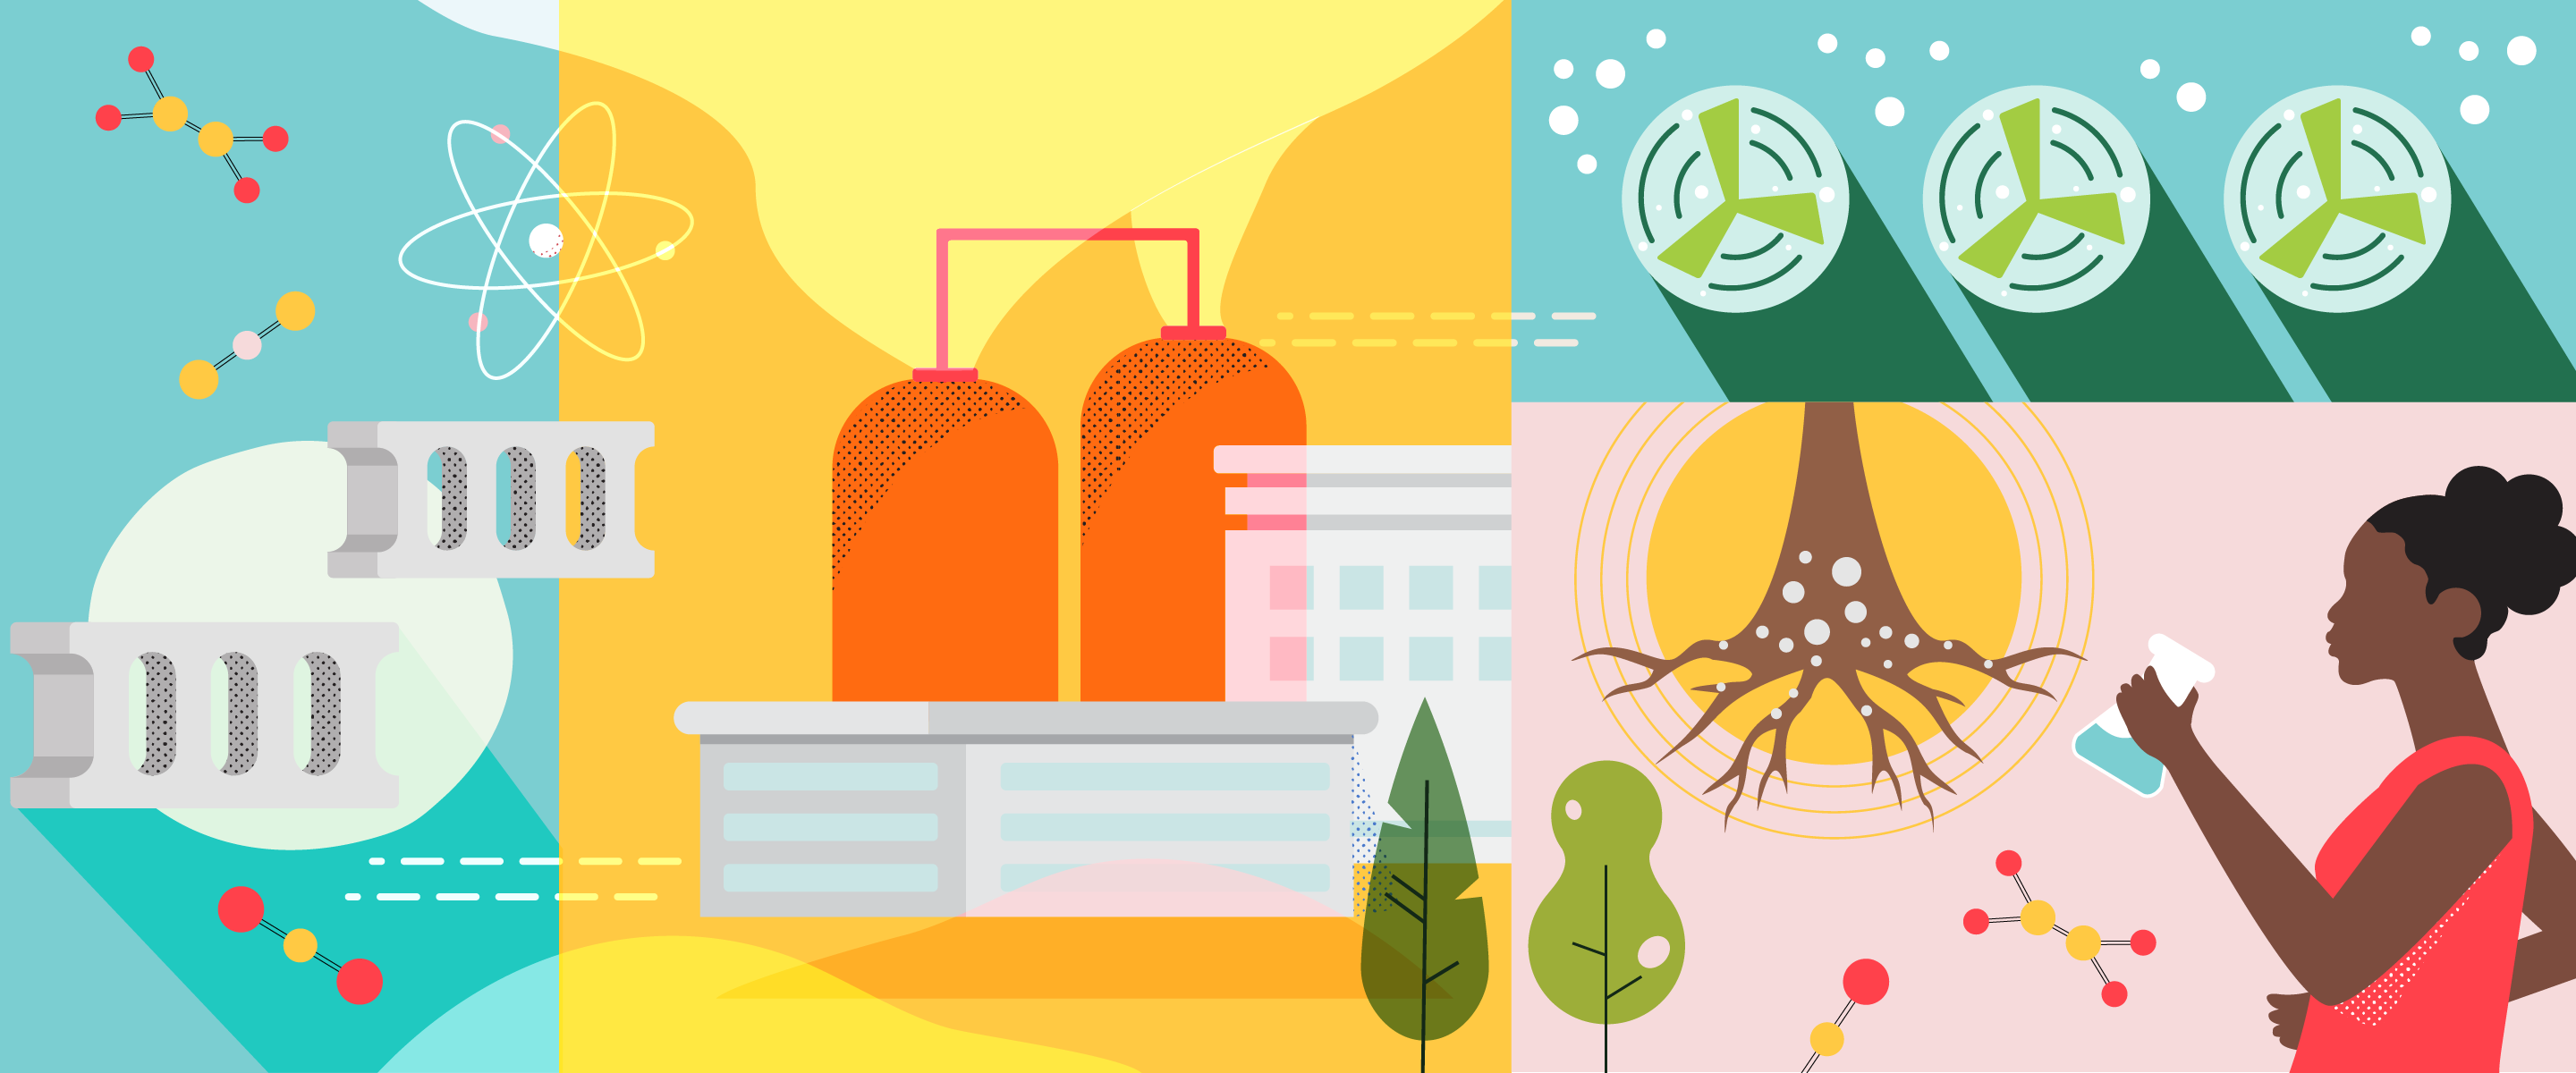 A colorful collage of science- and climate-related illustrations including trees, factories, a female scientist, wind turbines, climate-friendly concrete bricks, and cells.